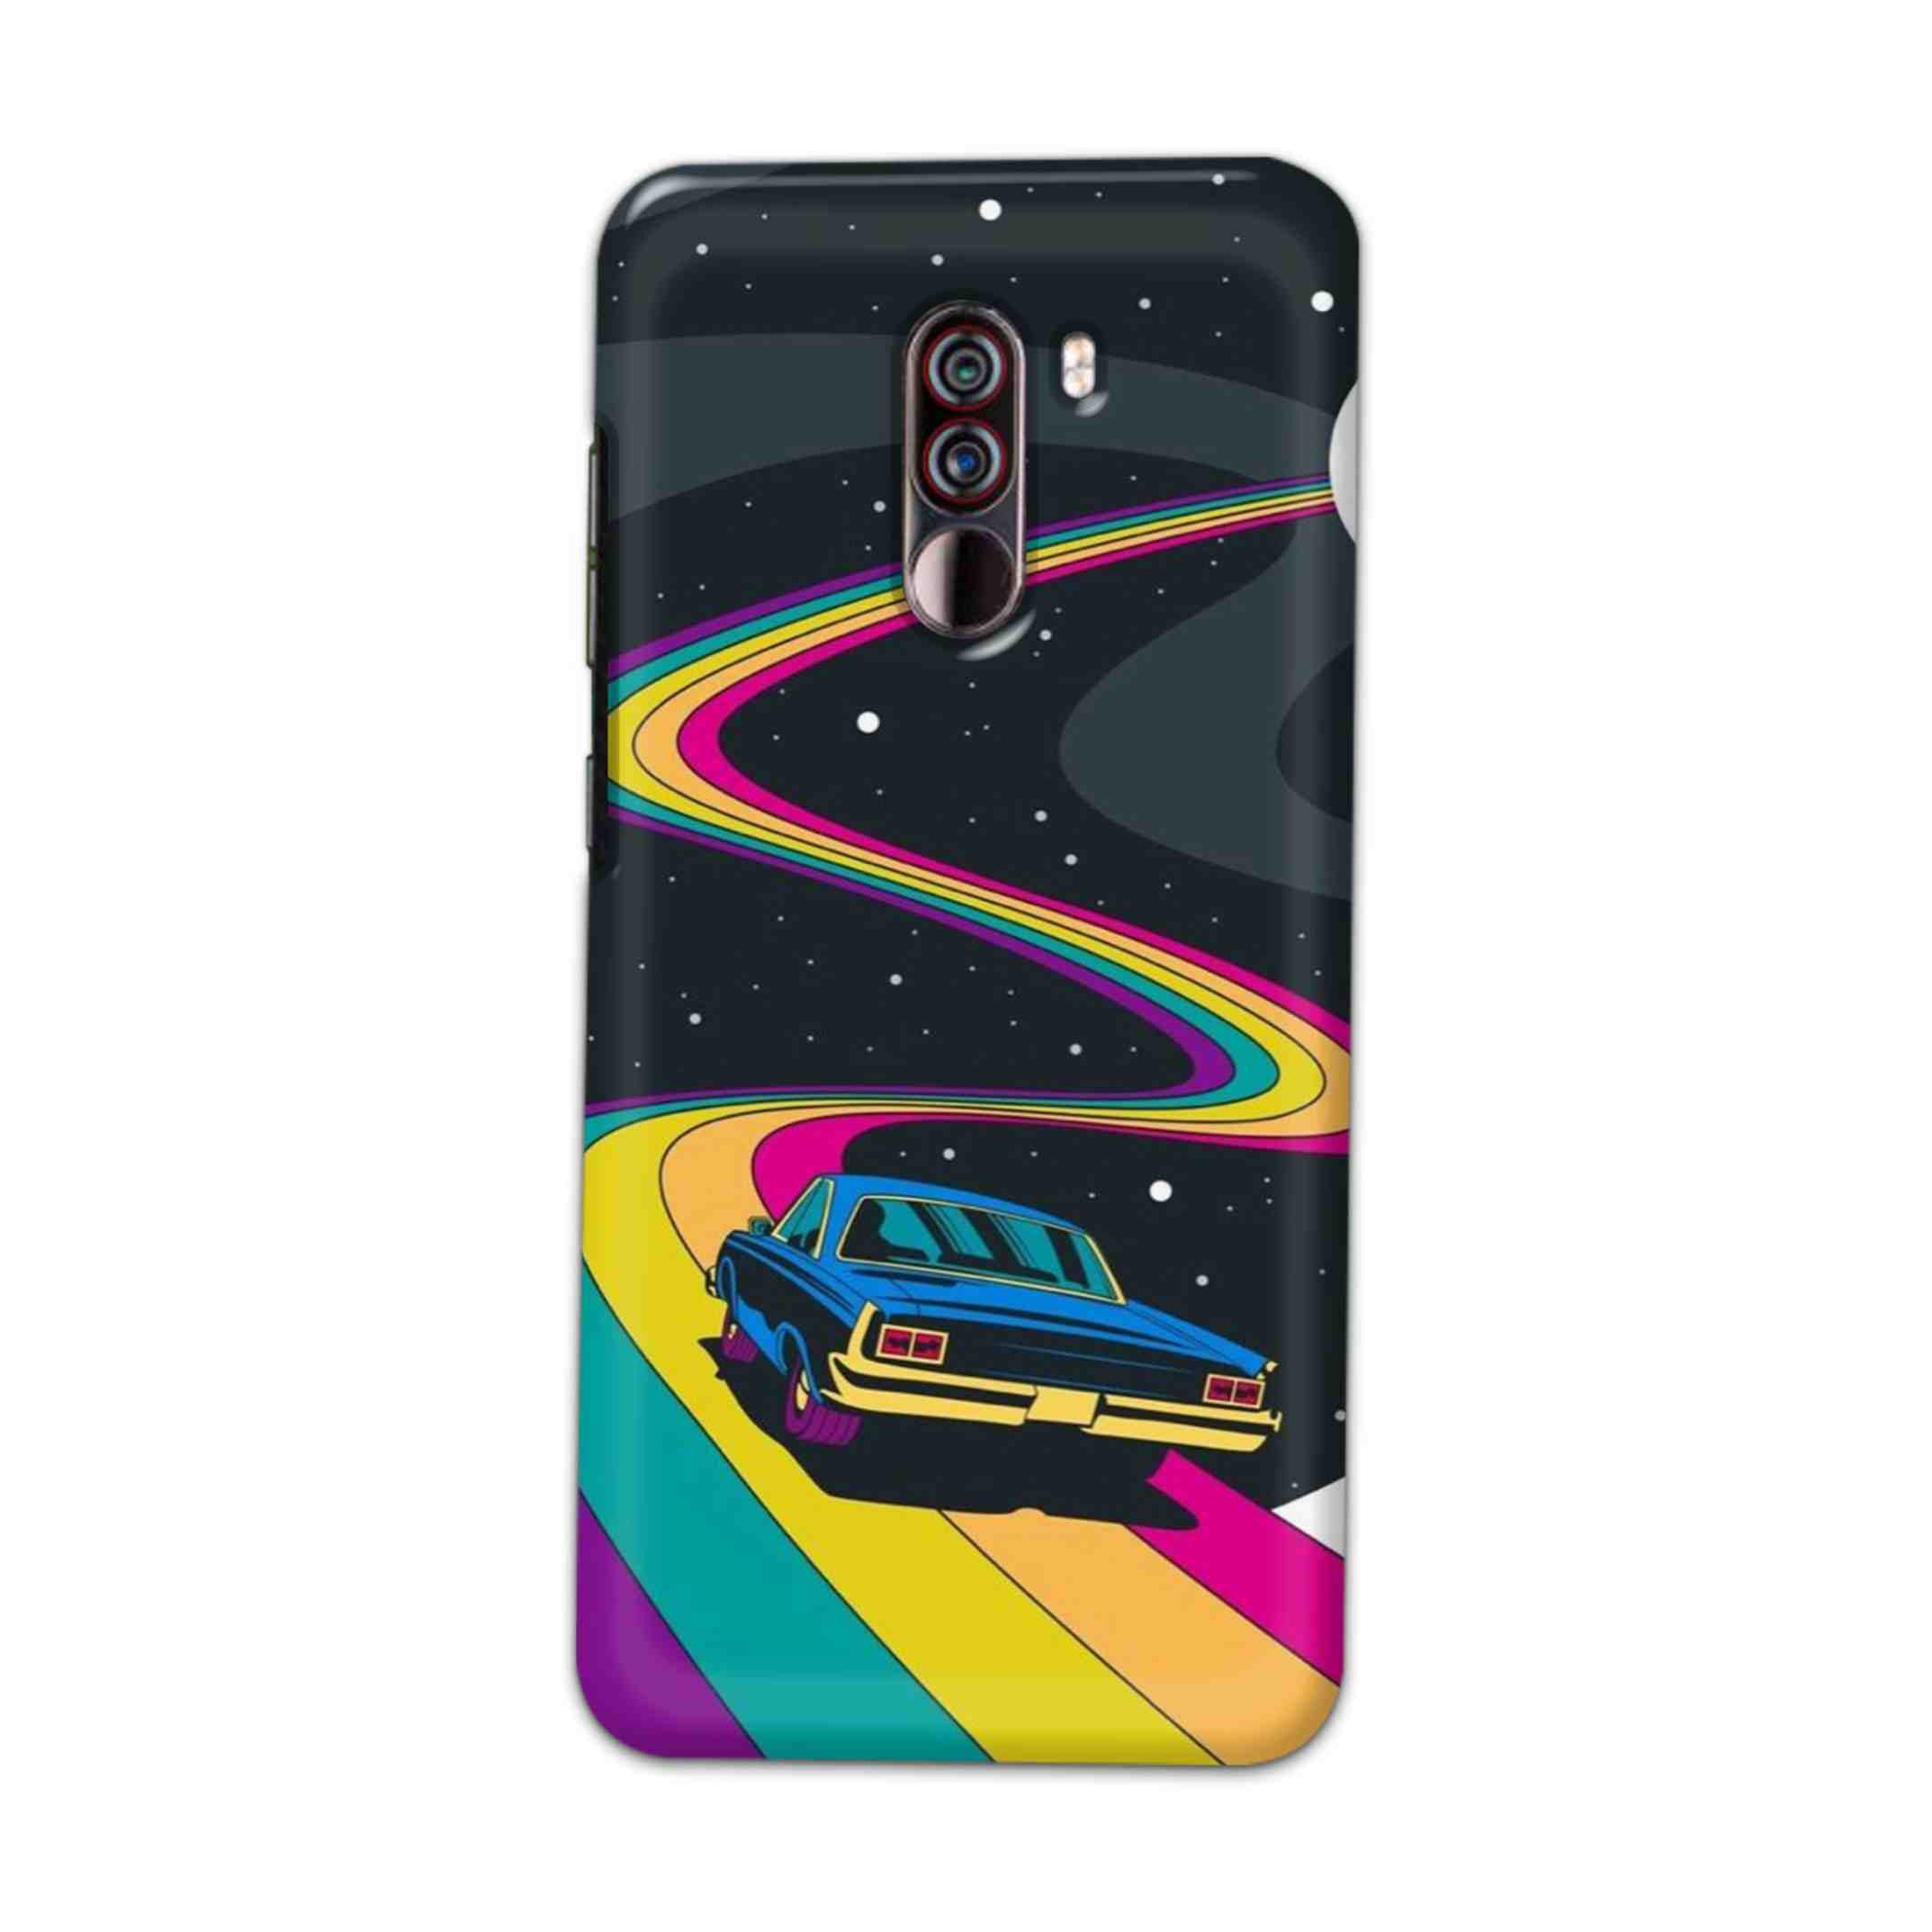 Buy  Neon Car Hard Back Mobile Phone Case Cover For Xiaomi Pocophone F1 Online